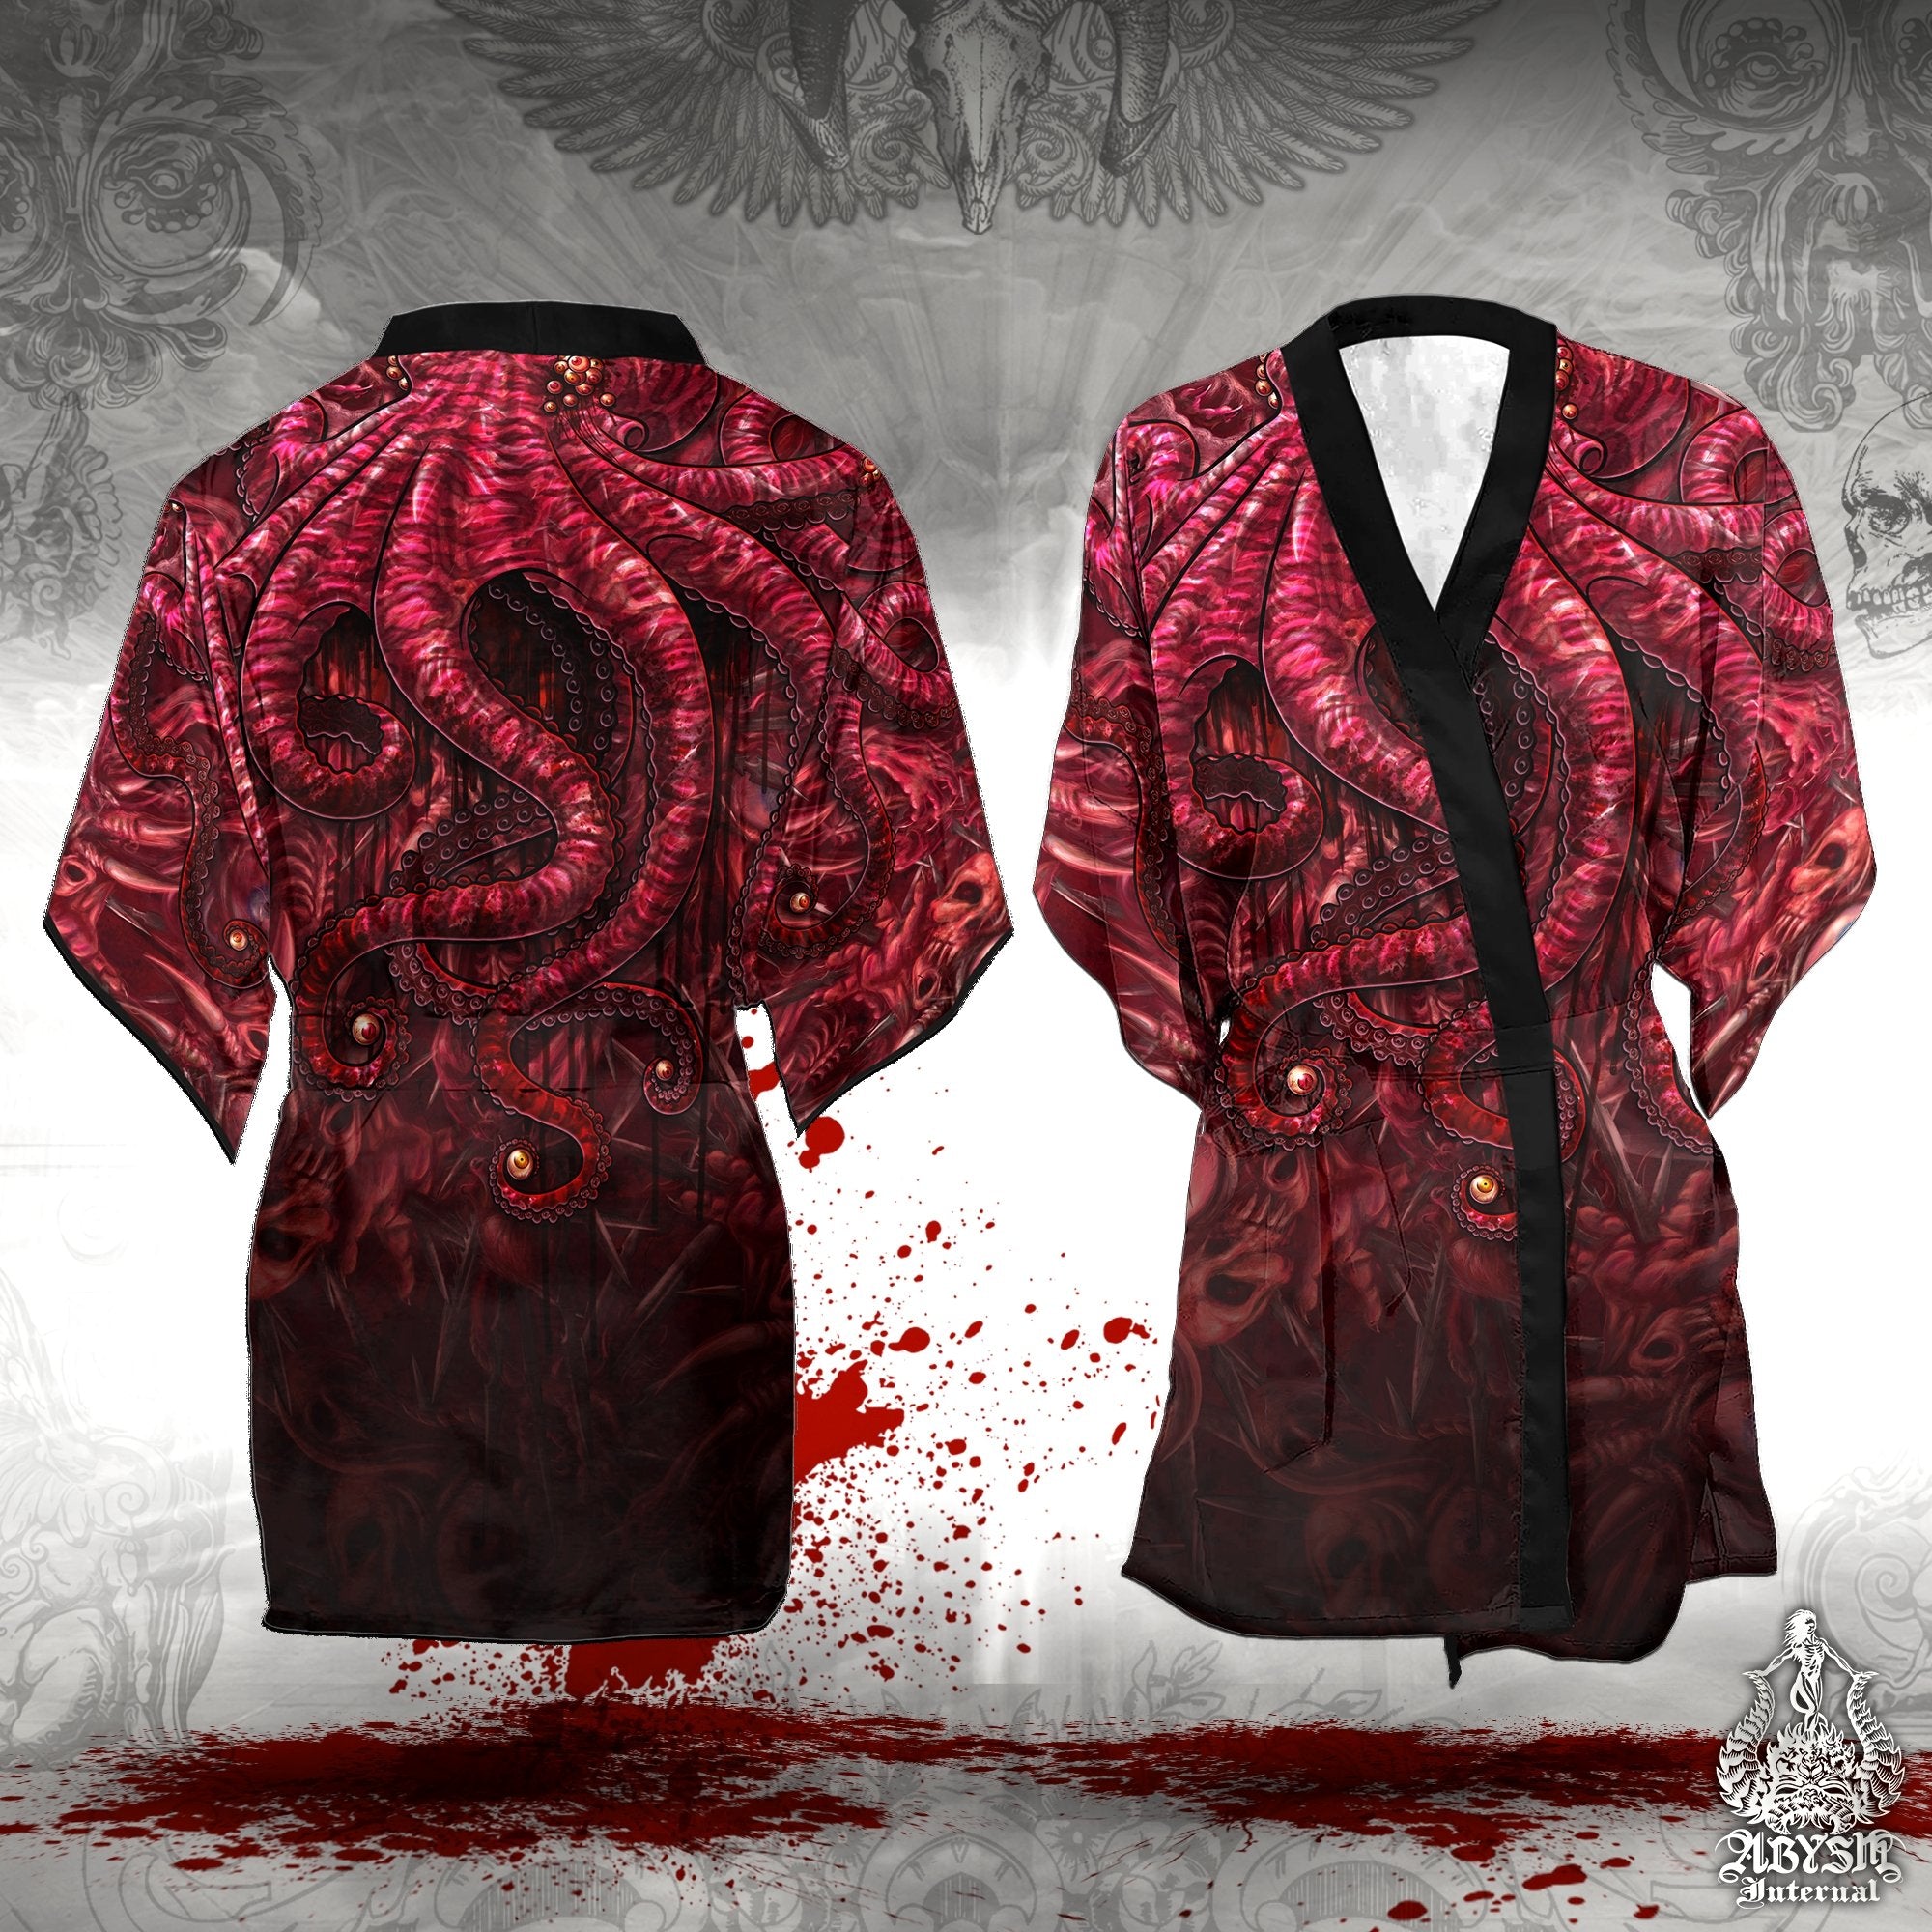 Horror Cover Up, Beach Outfit, Octopus Party Kimono, Beach Summer Festival Robe, Halloween Streetwear, Unisex - Gore and Blood - Abysm Internal